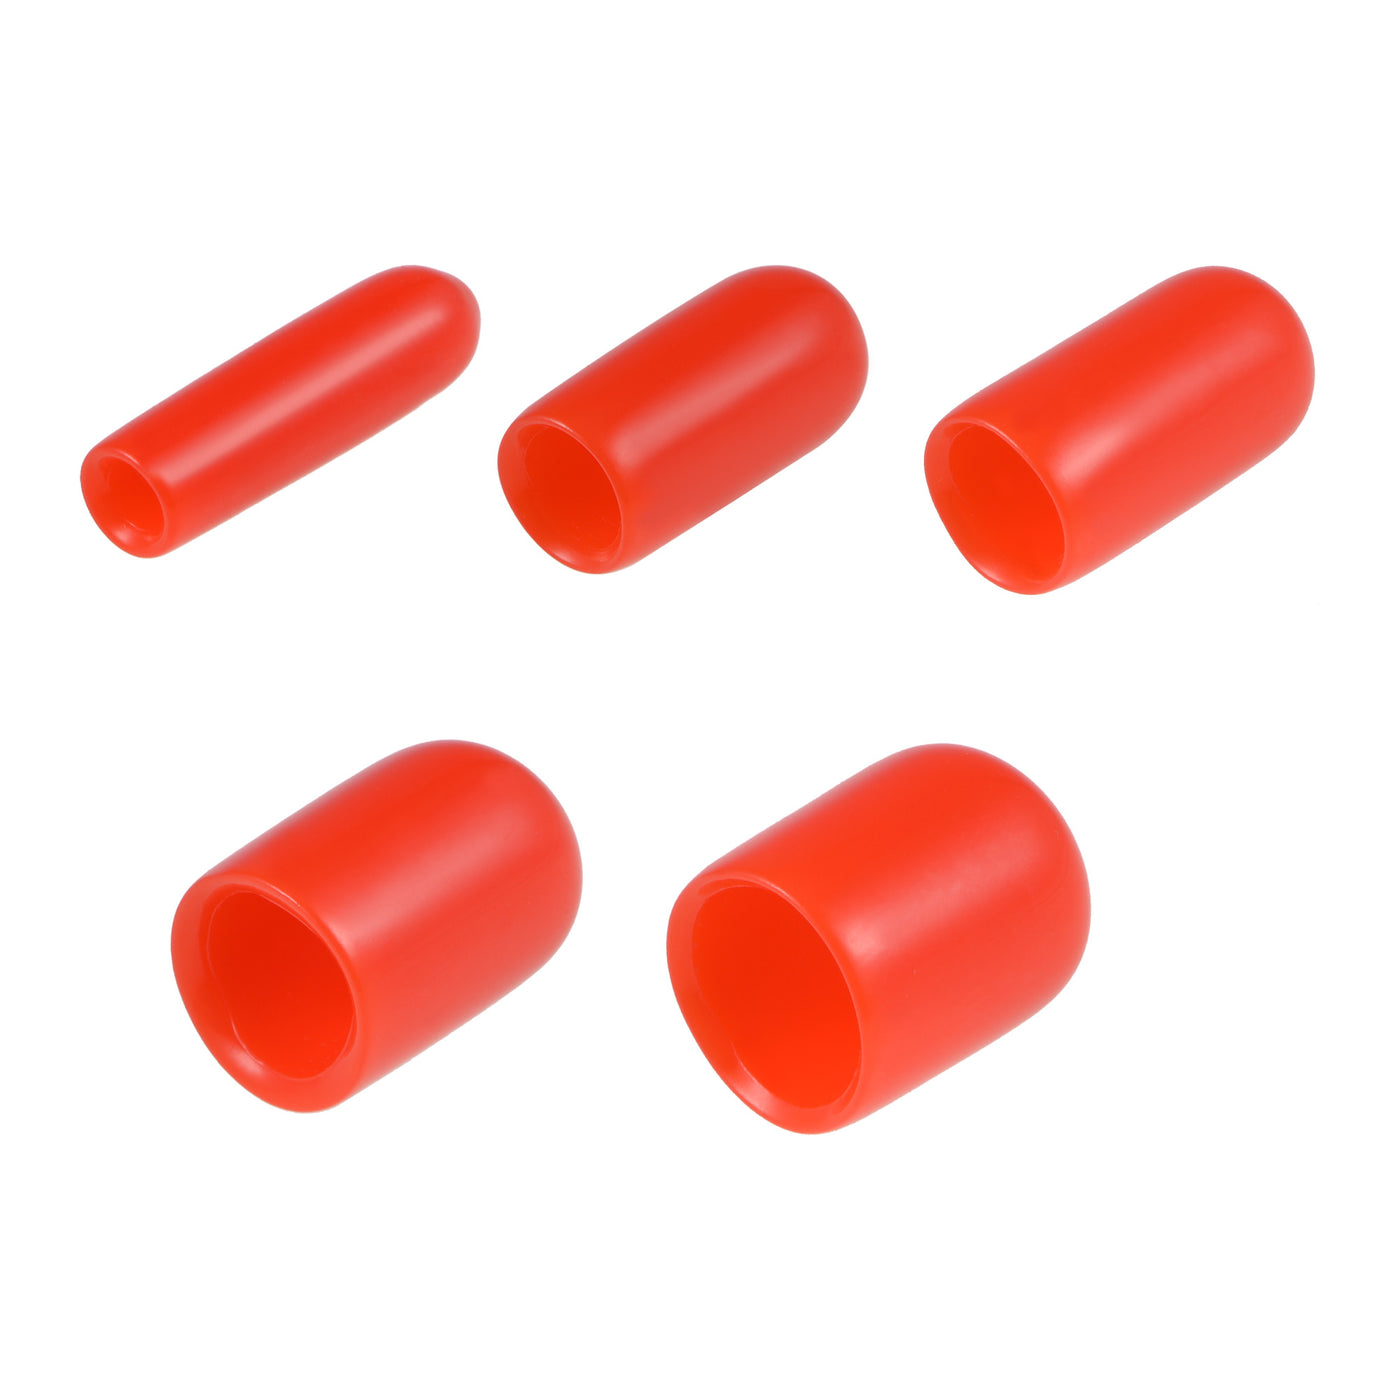 uxcell Uxcell 100pcs Round Rubber End Caps 1/8" 3/16" 1/4" 5/16" 3/8" Red Vinyl Cover Screw Thread Protectors Assortment Kit